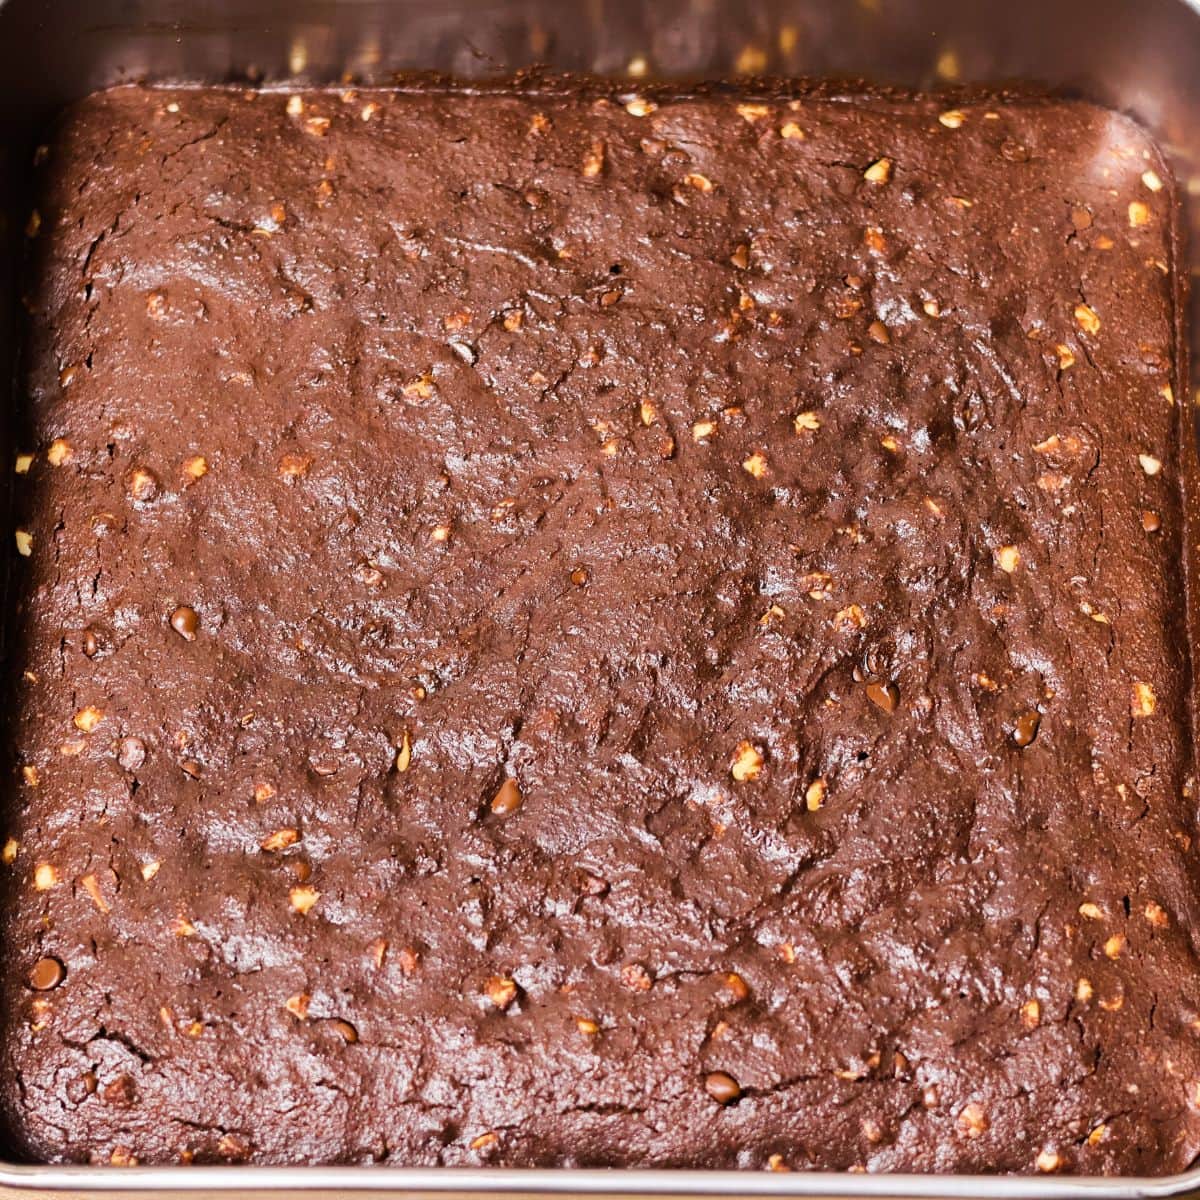 A full square baking dish of uncut dairy-free gluten-free brownies with visible nuts and chocolate chips baked into the top.